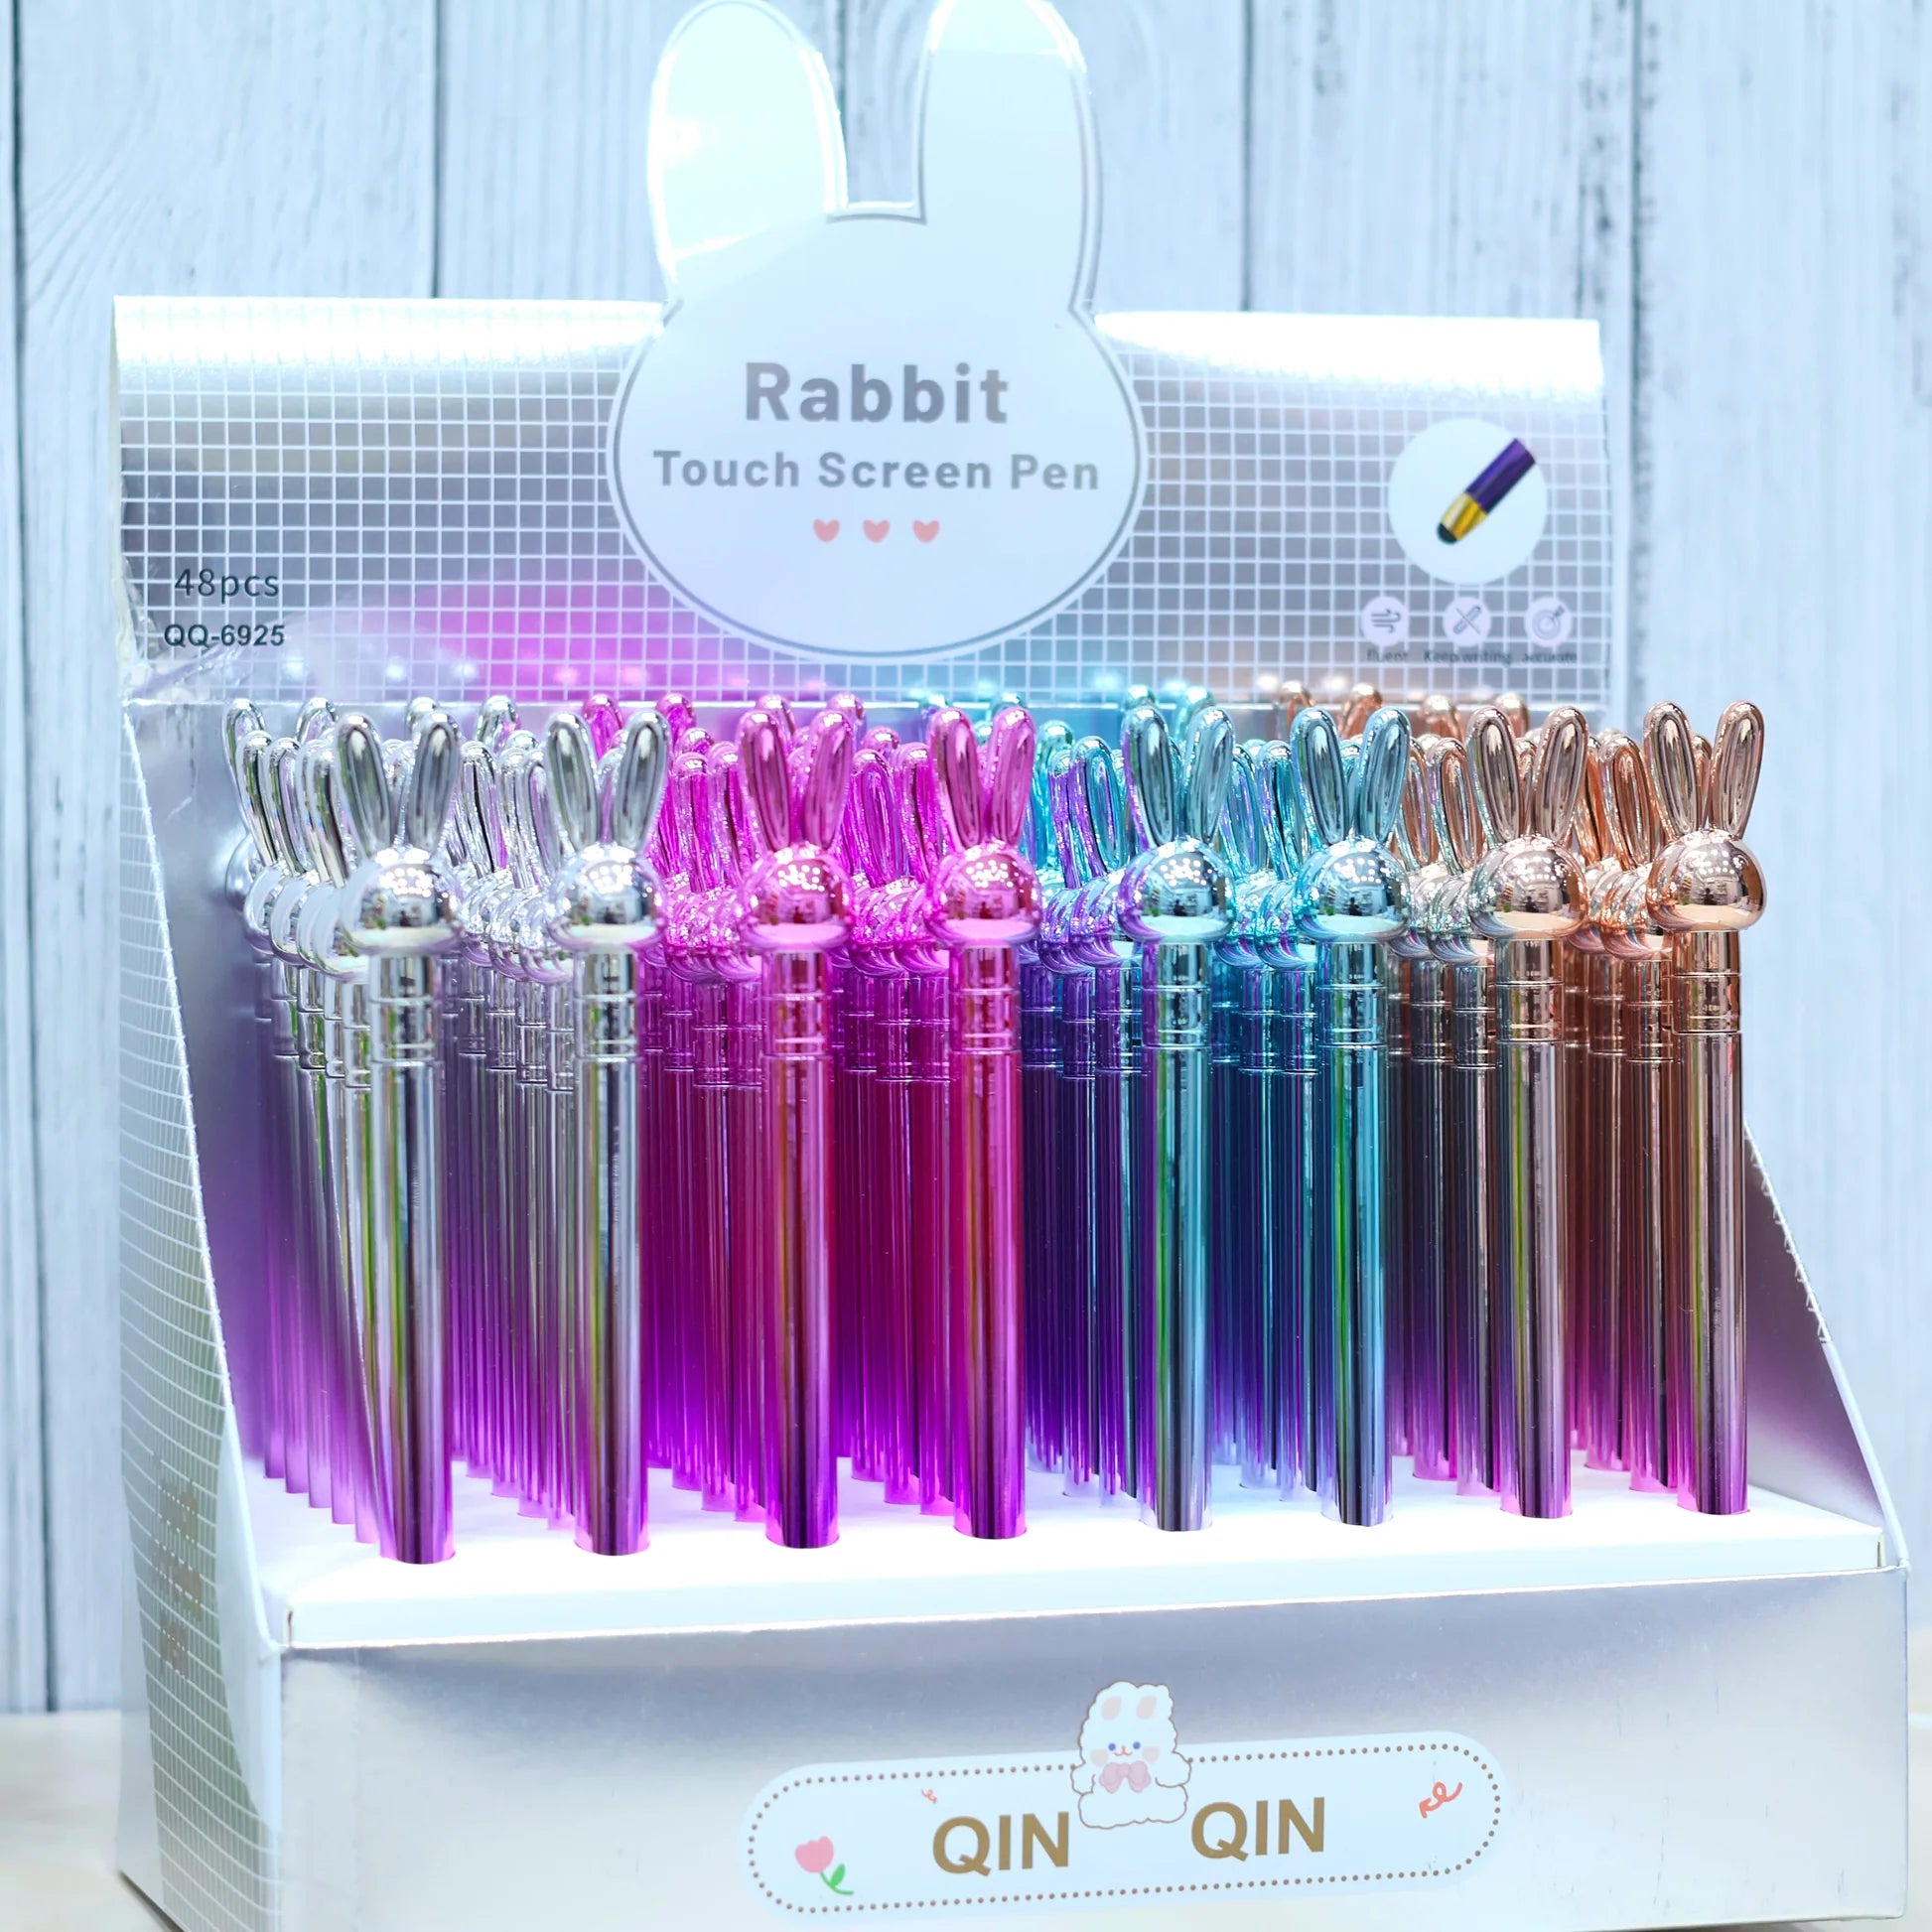 Rabbit Glossy Touchscreen Stylus and Writing Pen 2 in 1